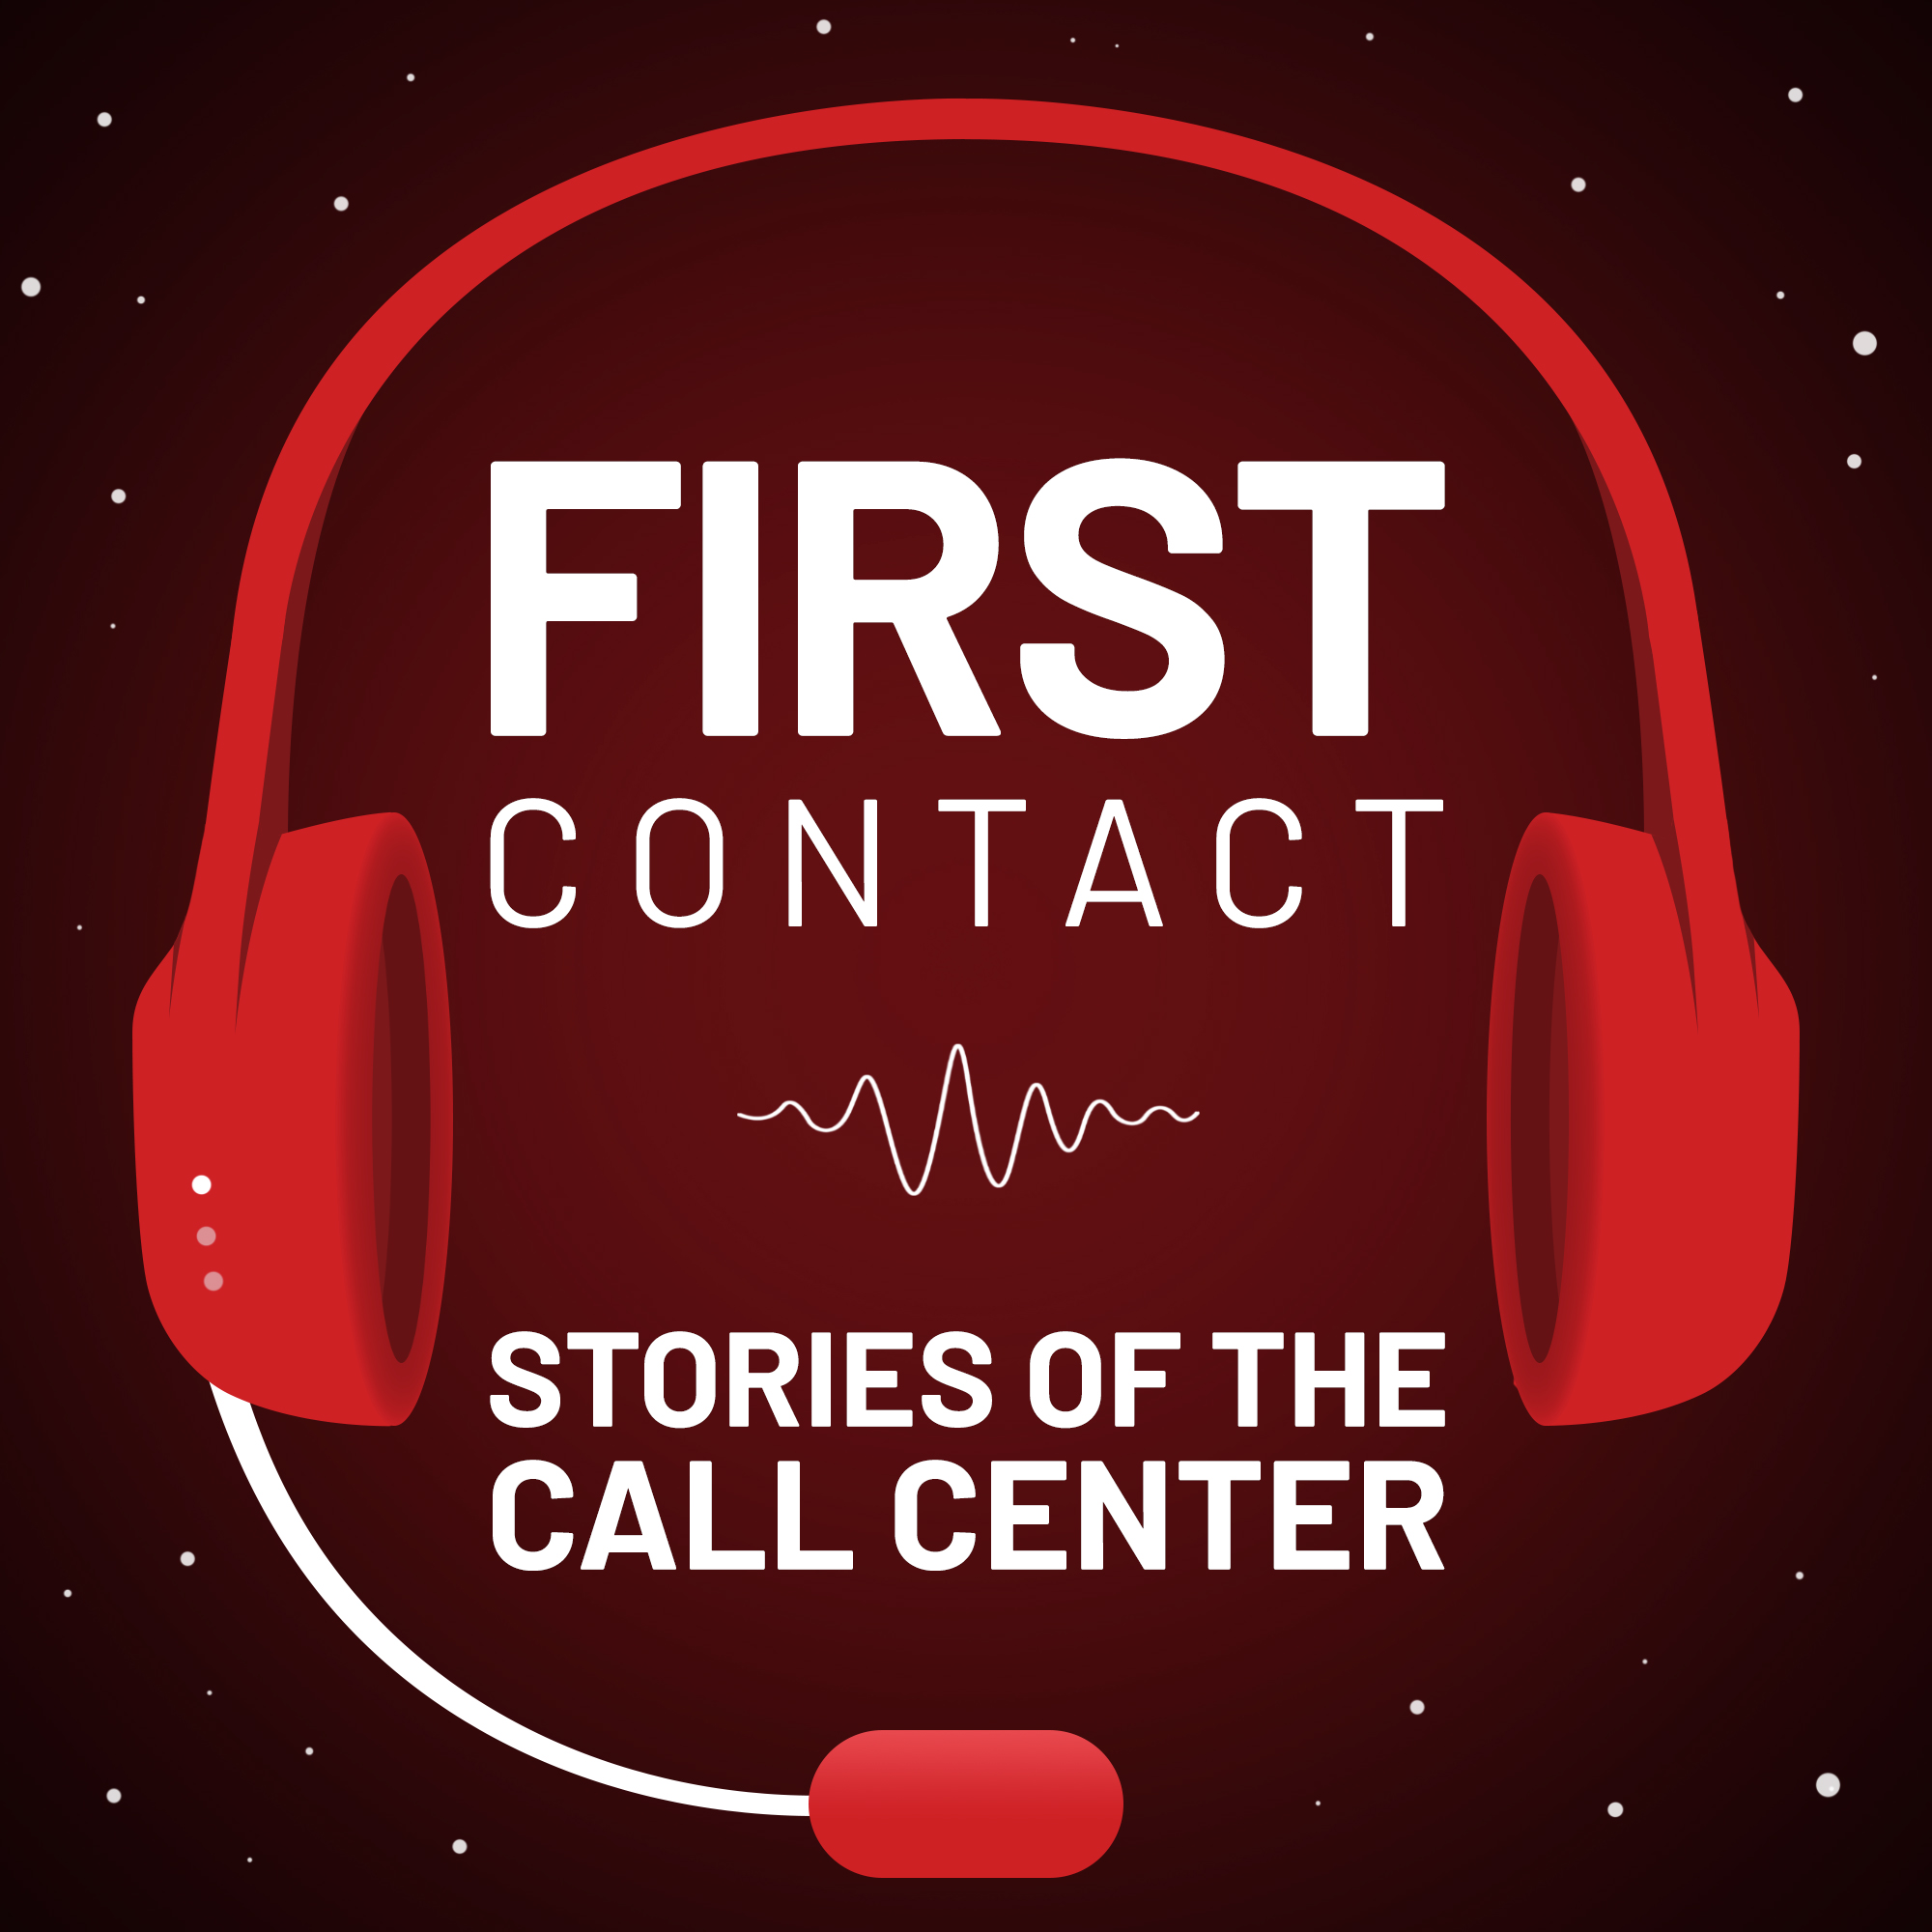 First Contact: Stories of the Call Center